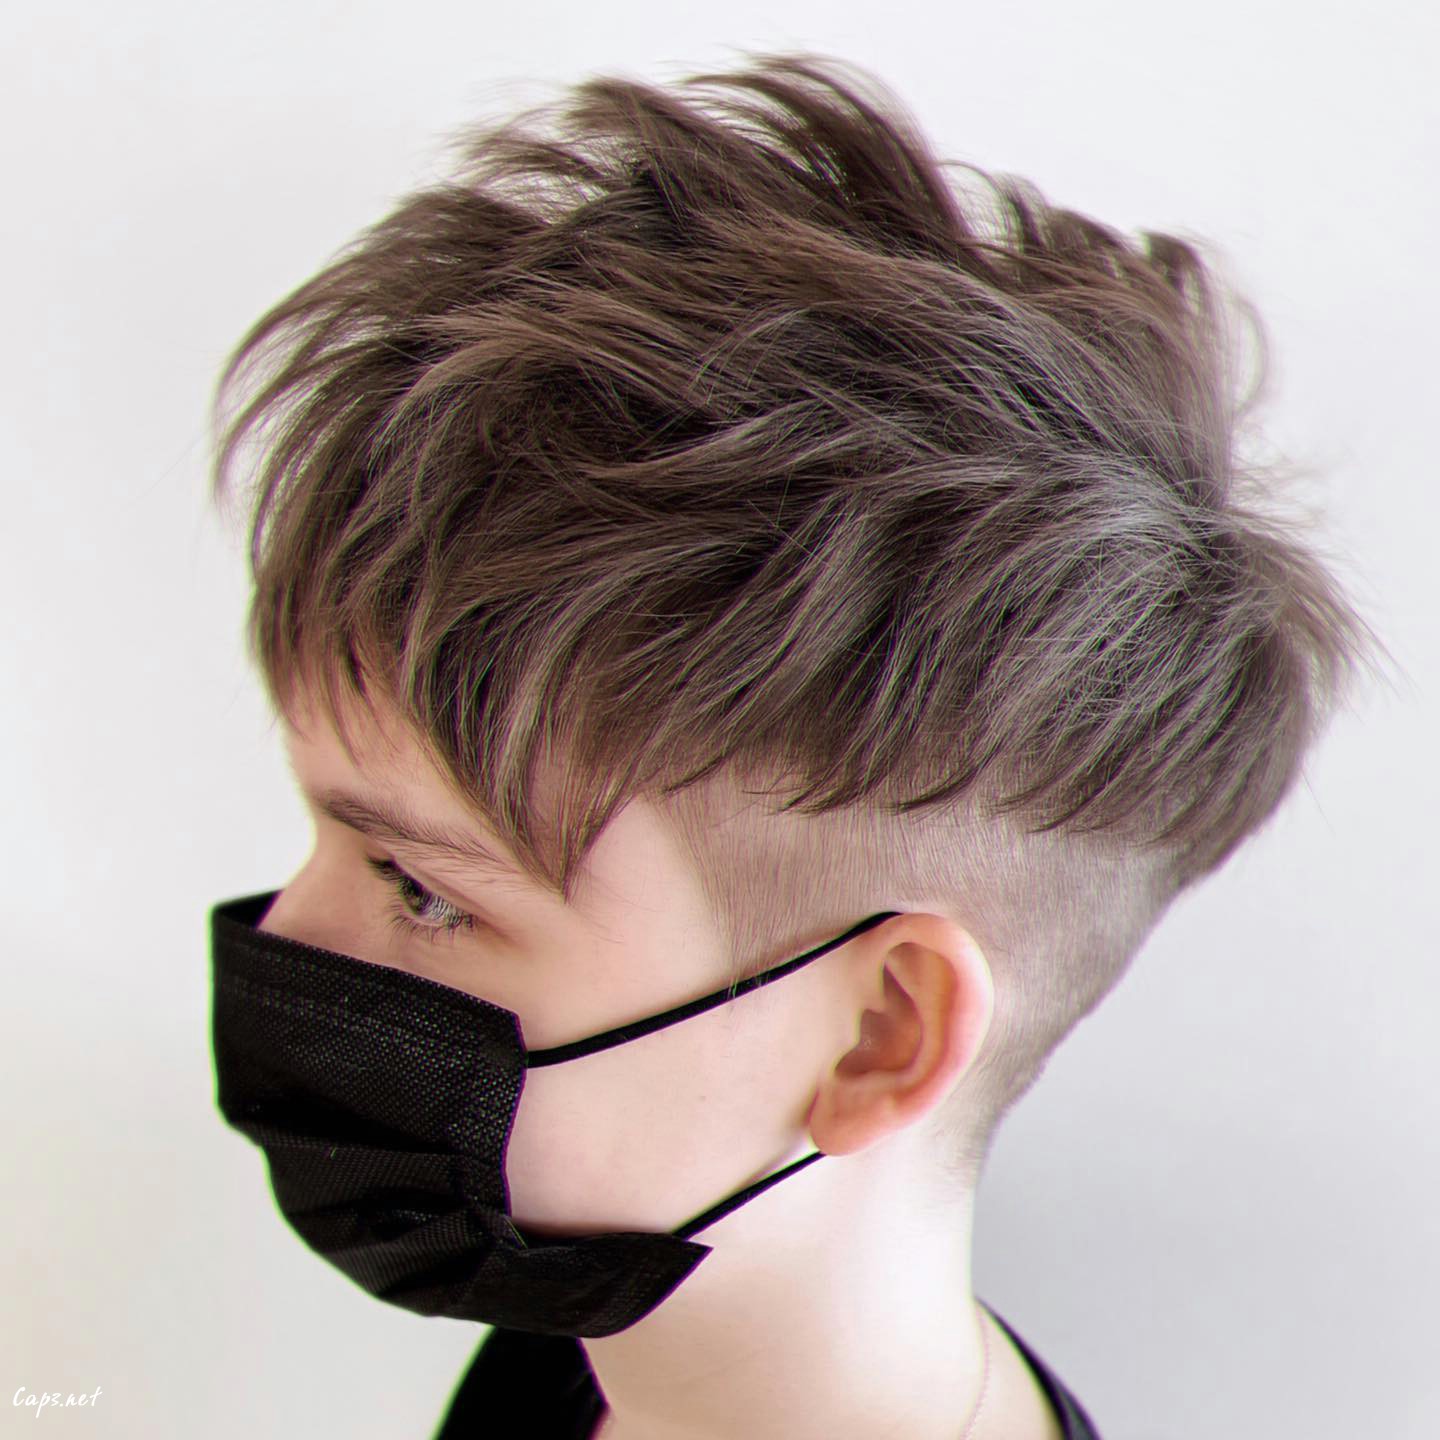 Long Pixie With An Edgy Undercut